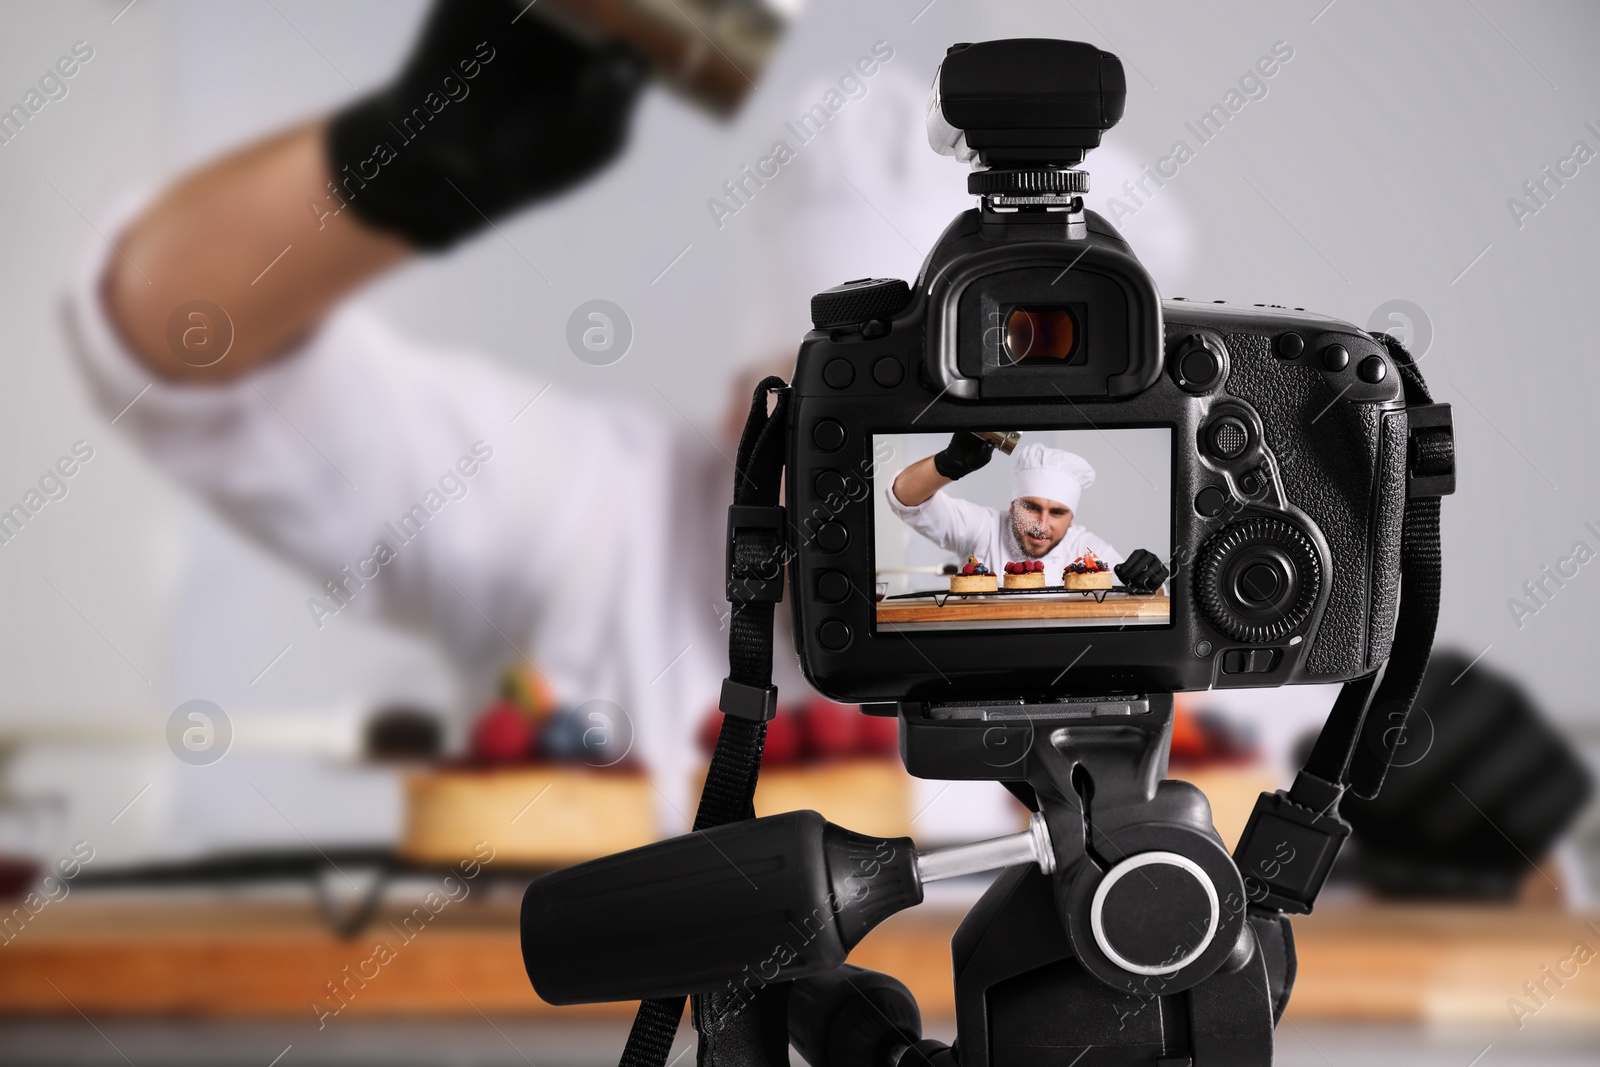 Image of Food photography. Shooting of chef decorating desserts, focus on camera